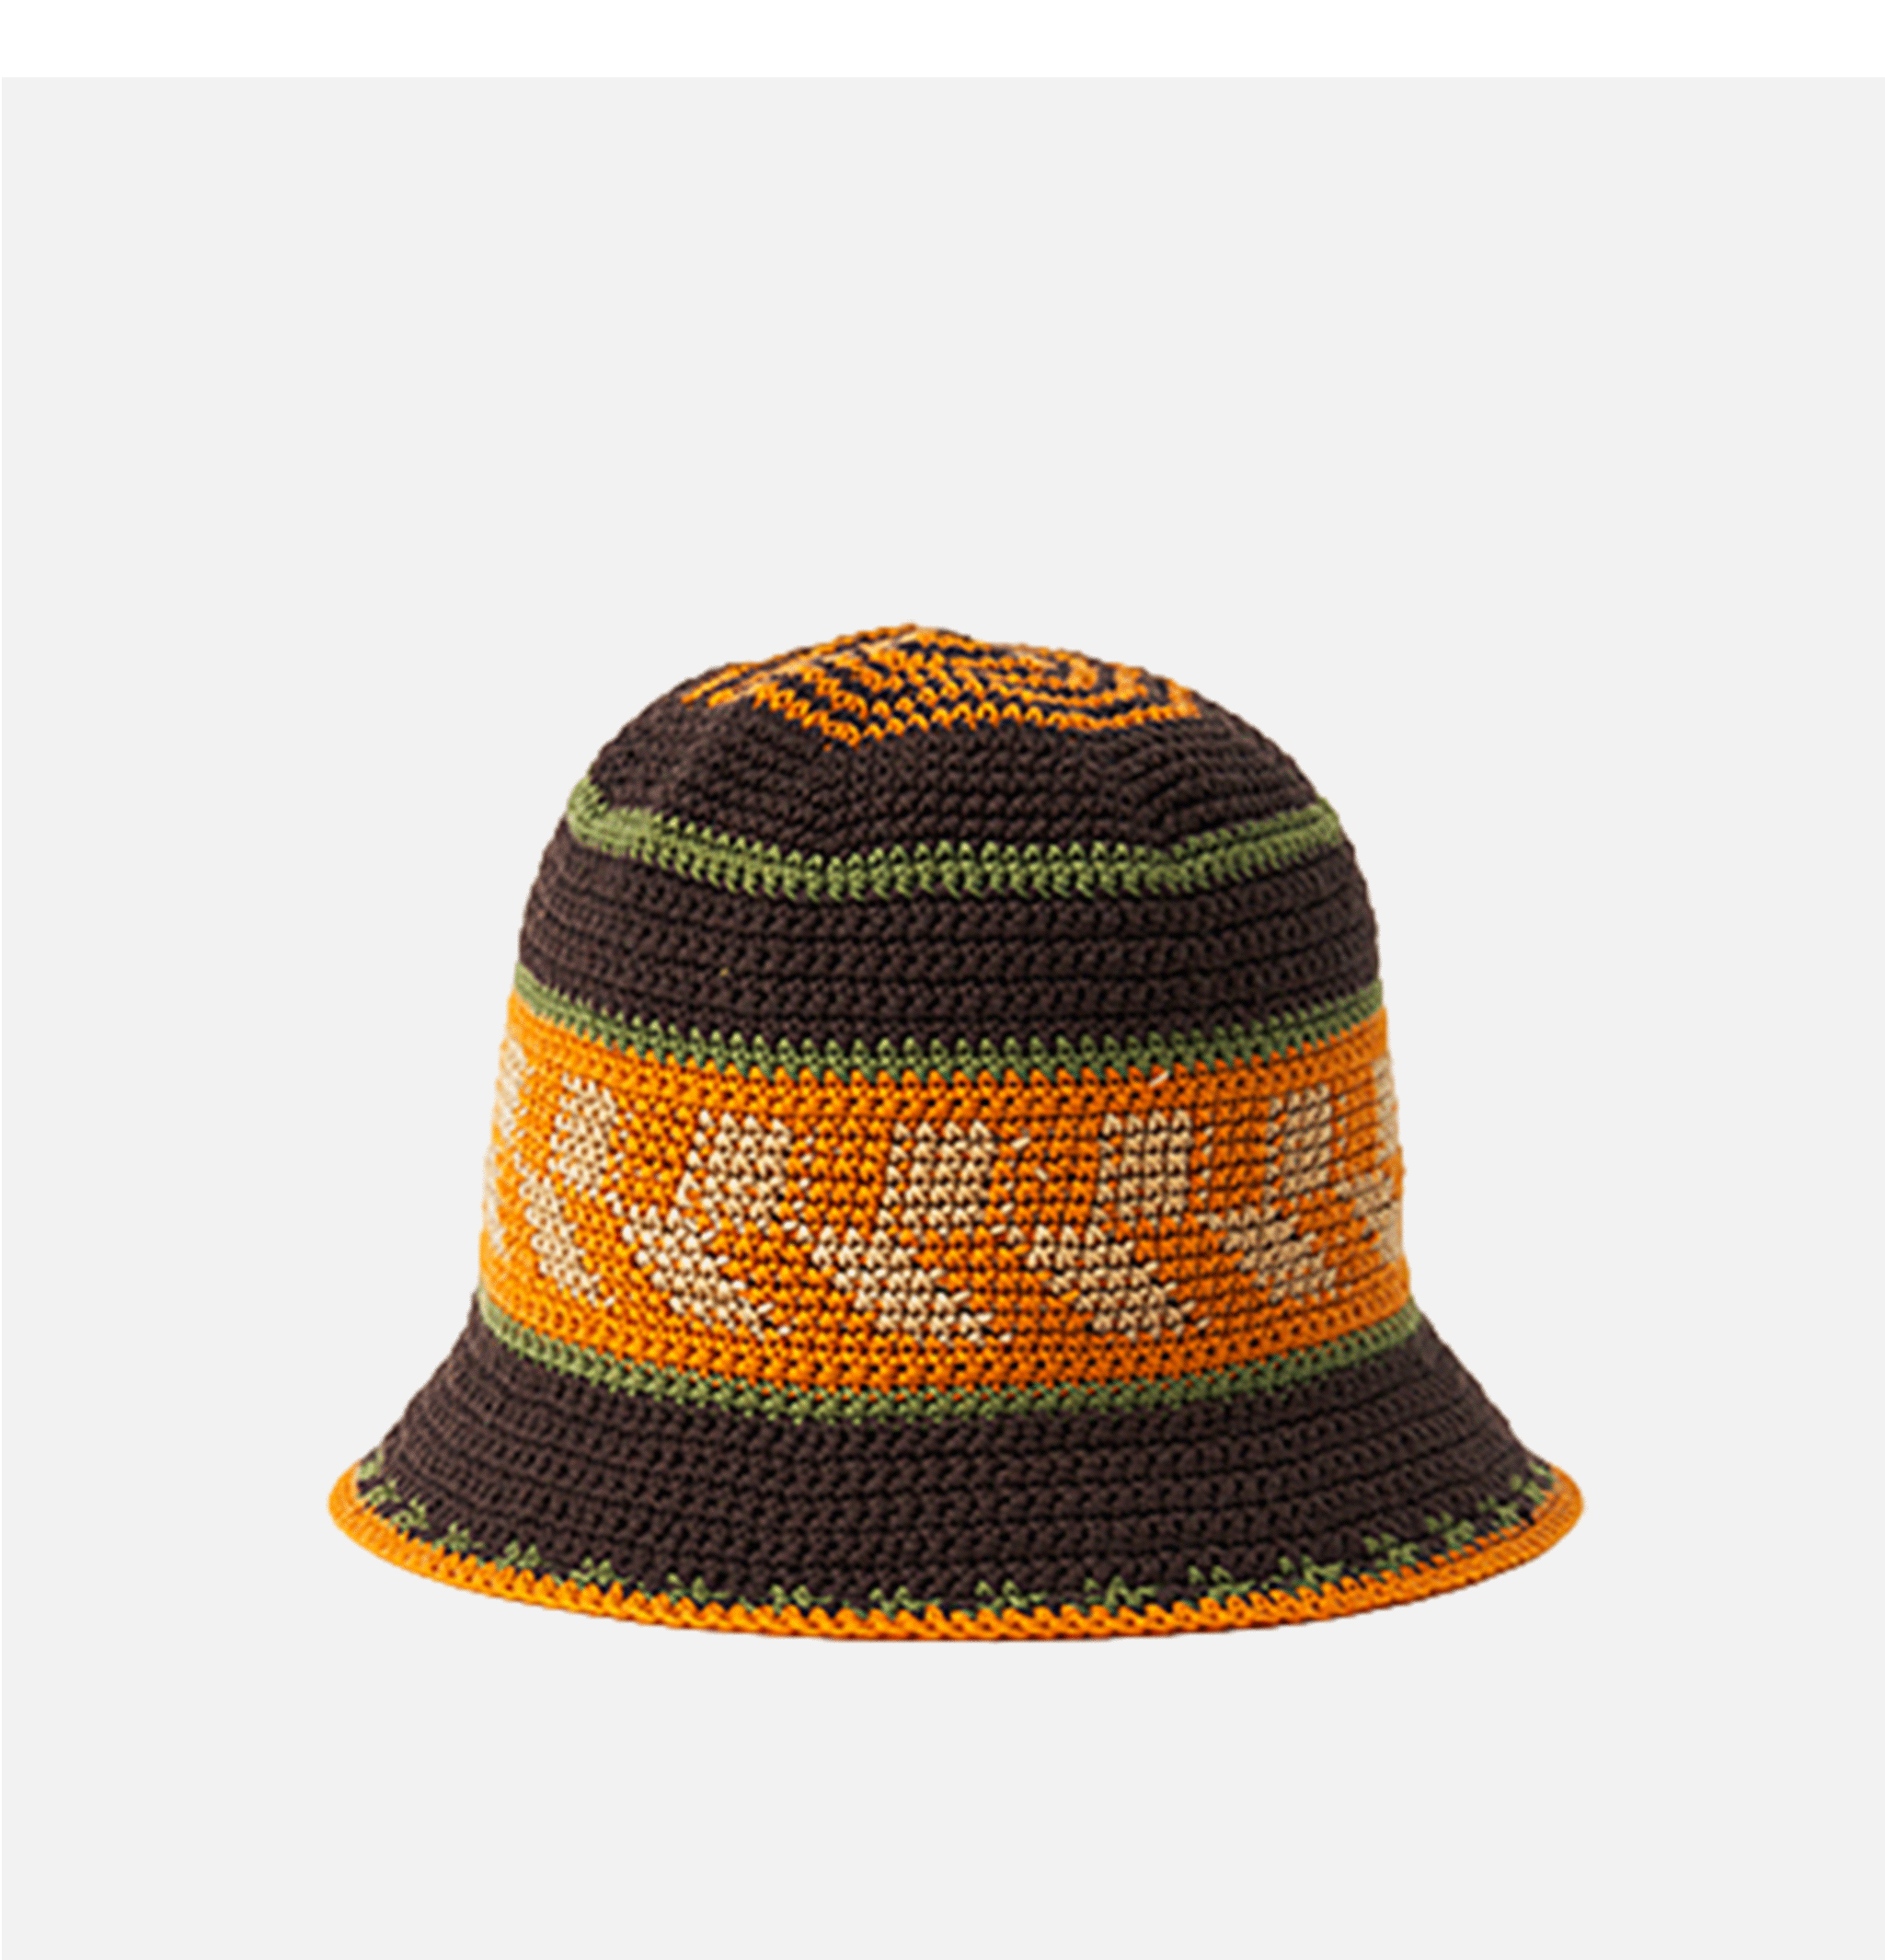 Sublime hand-knitted hat Brown Orange